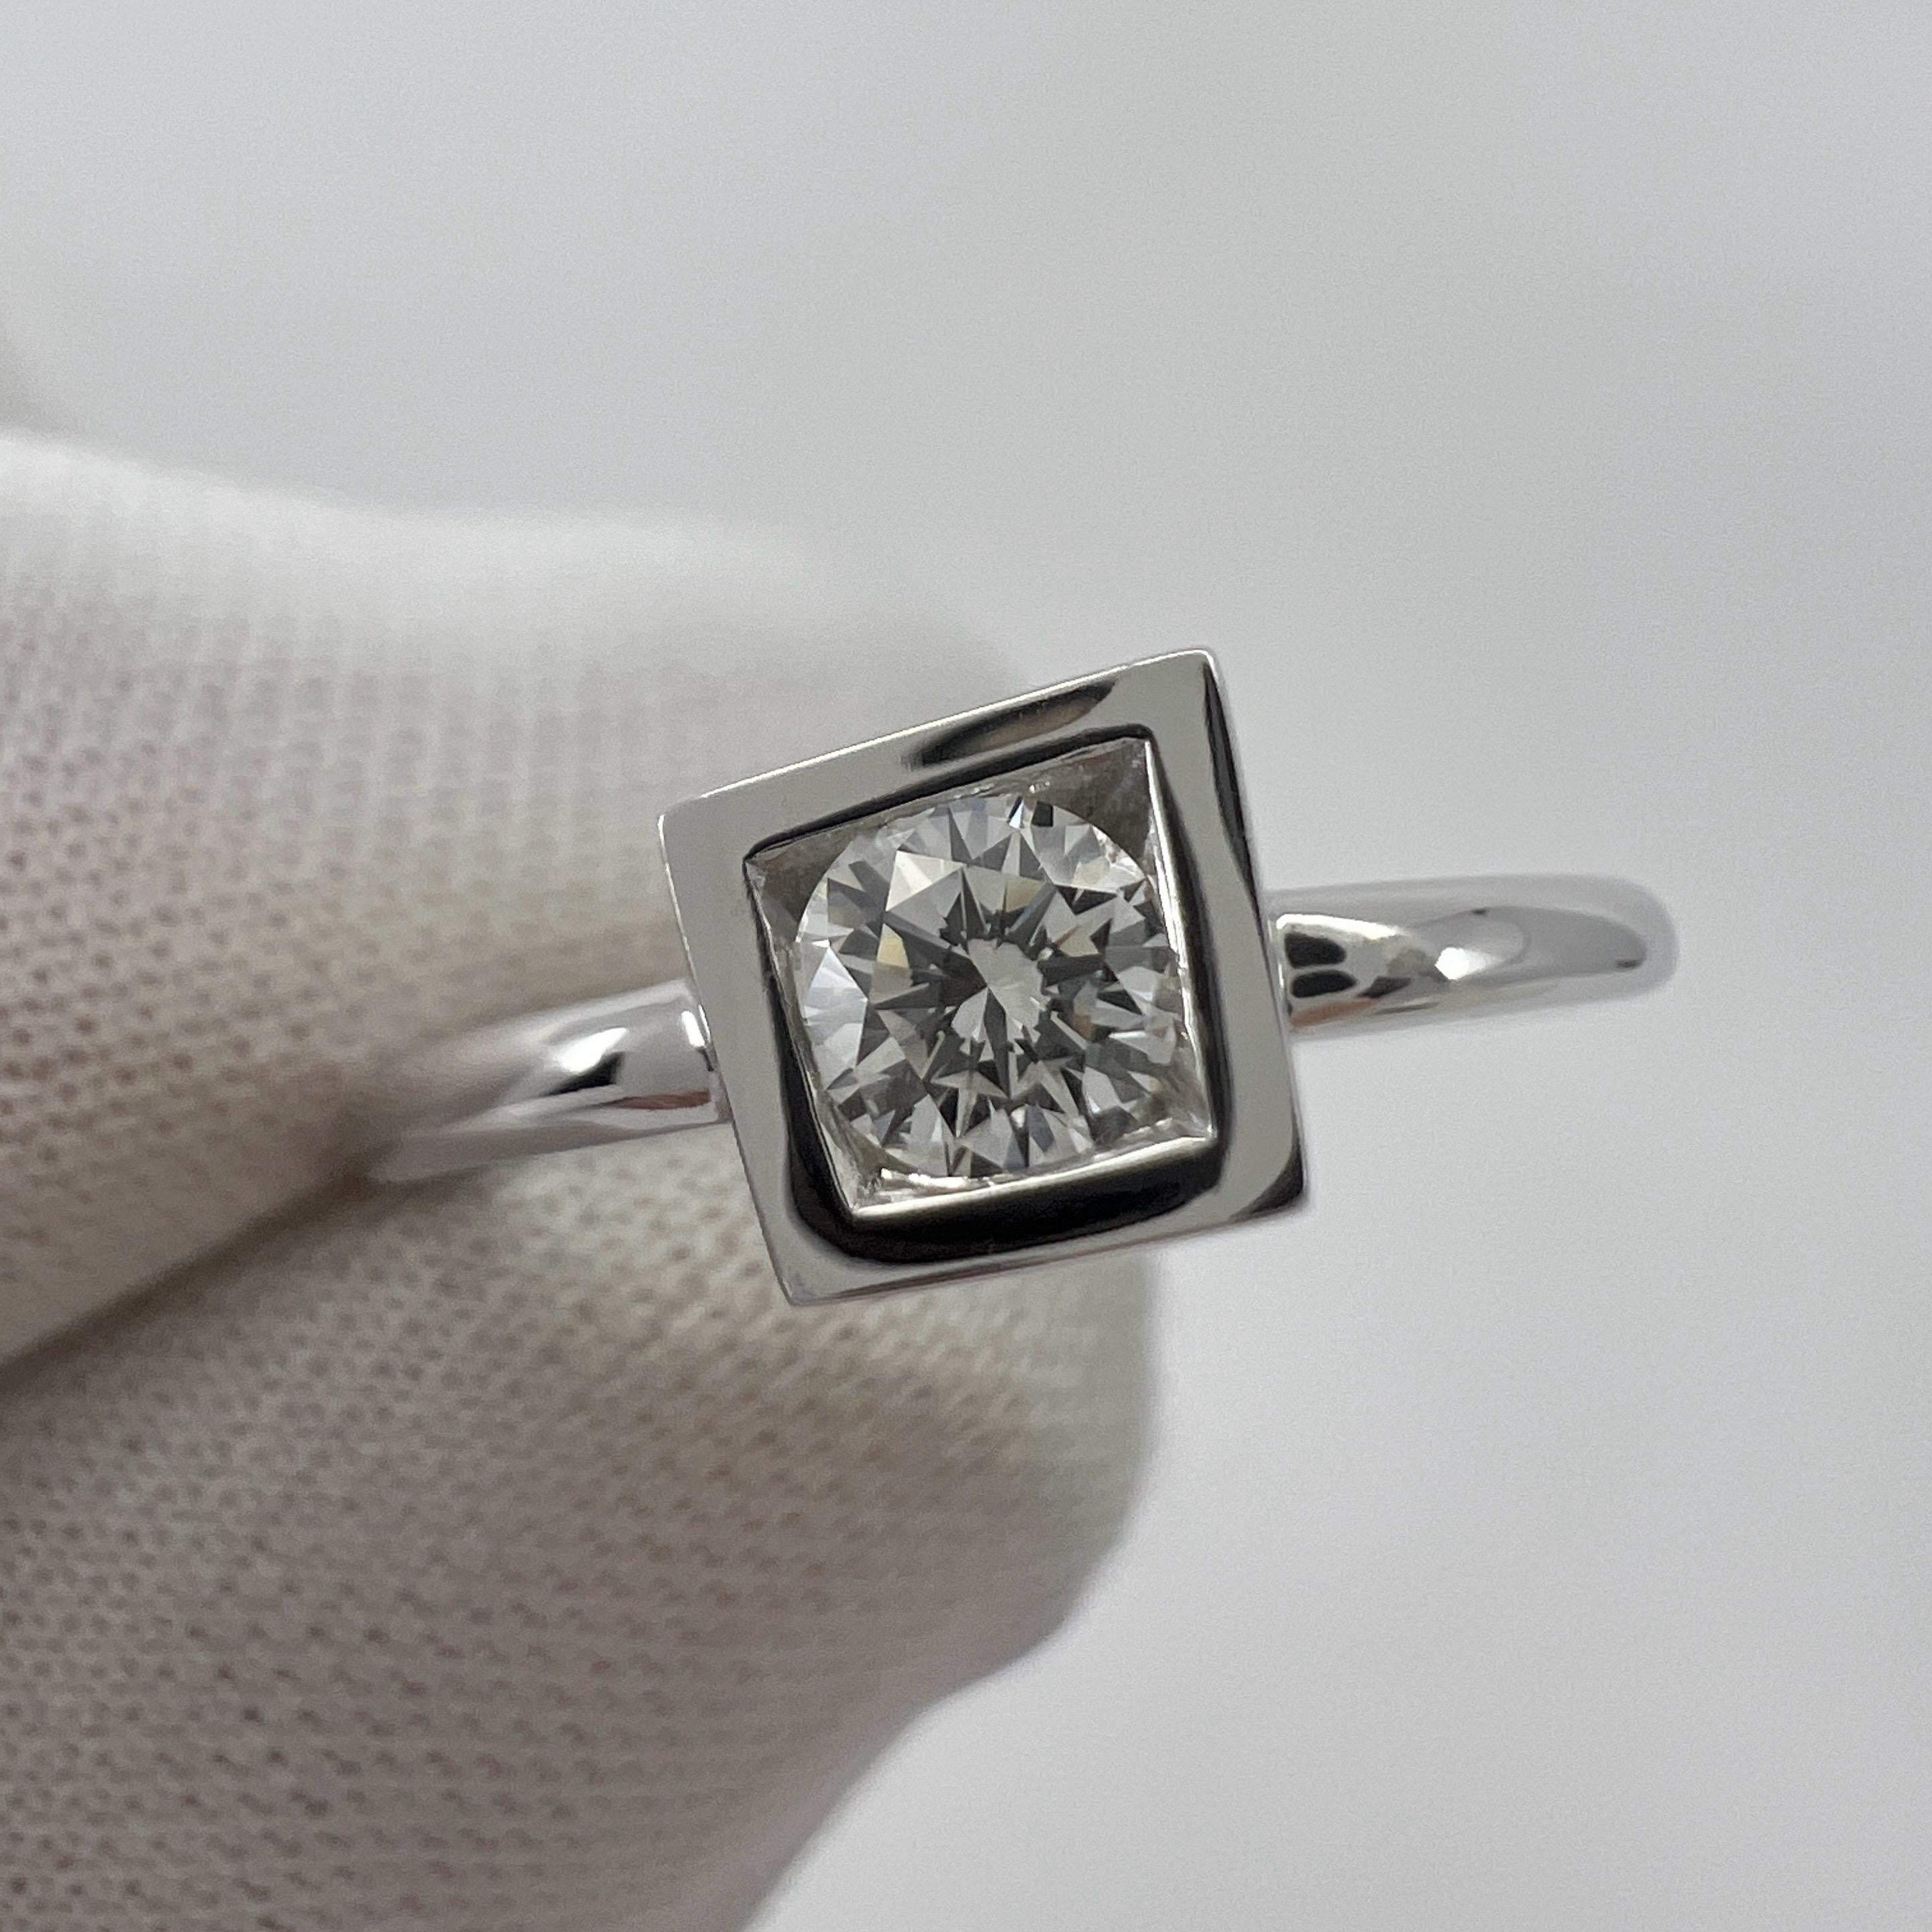 Rare Tiffany & Co Frank Gehry Torque Round Diamond 18k White Gold Solitaire Ring For Sale 2